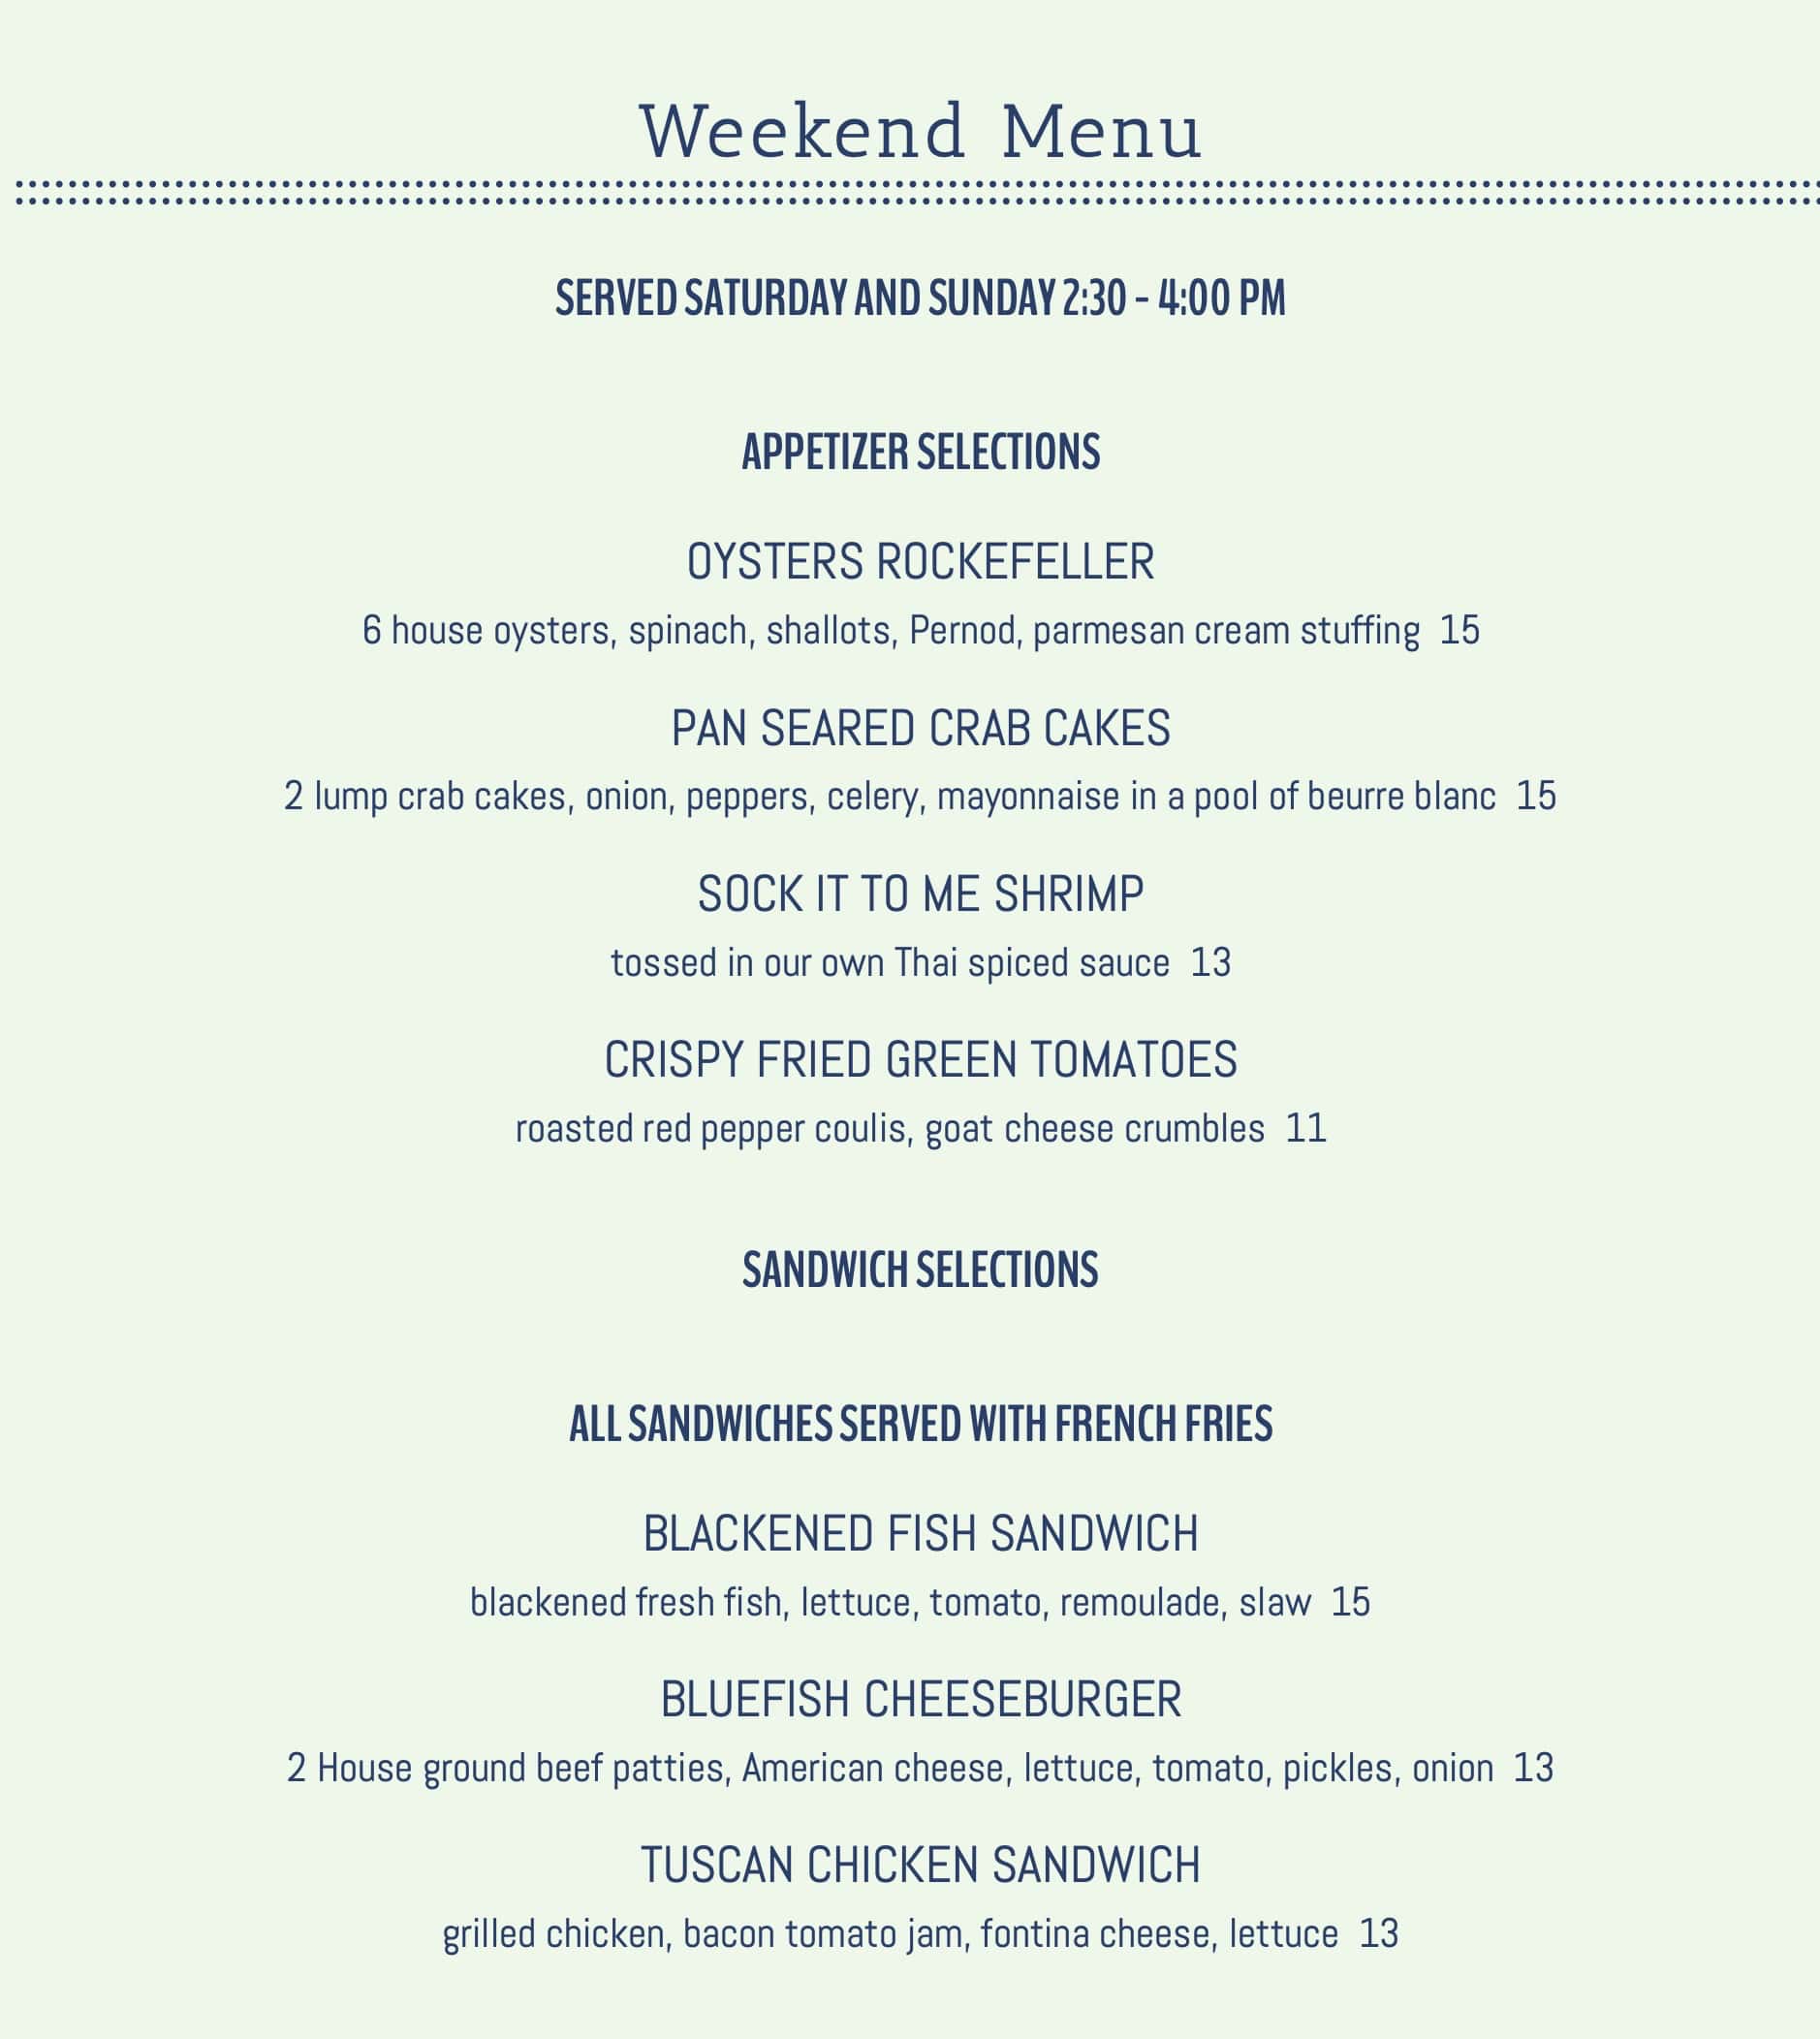 The Blue Fish Restaurant and Oyster Bar Weekend Menu